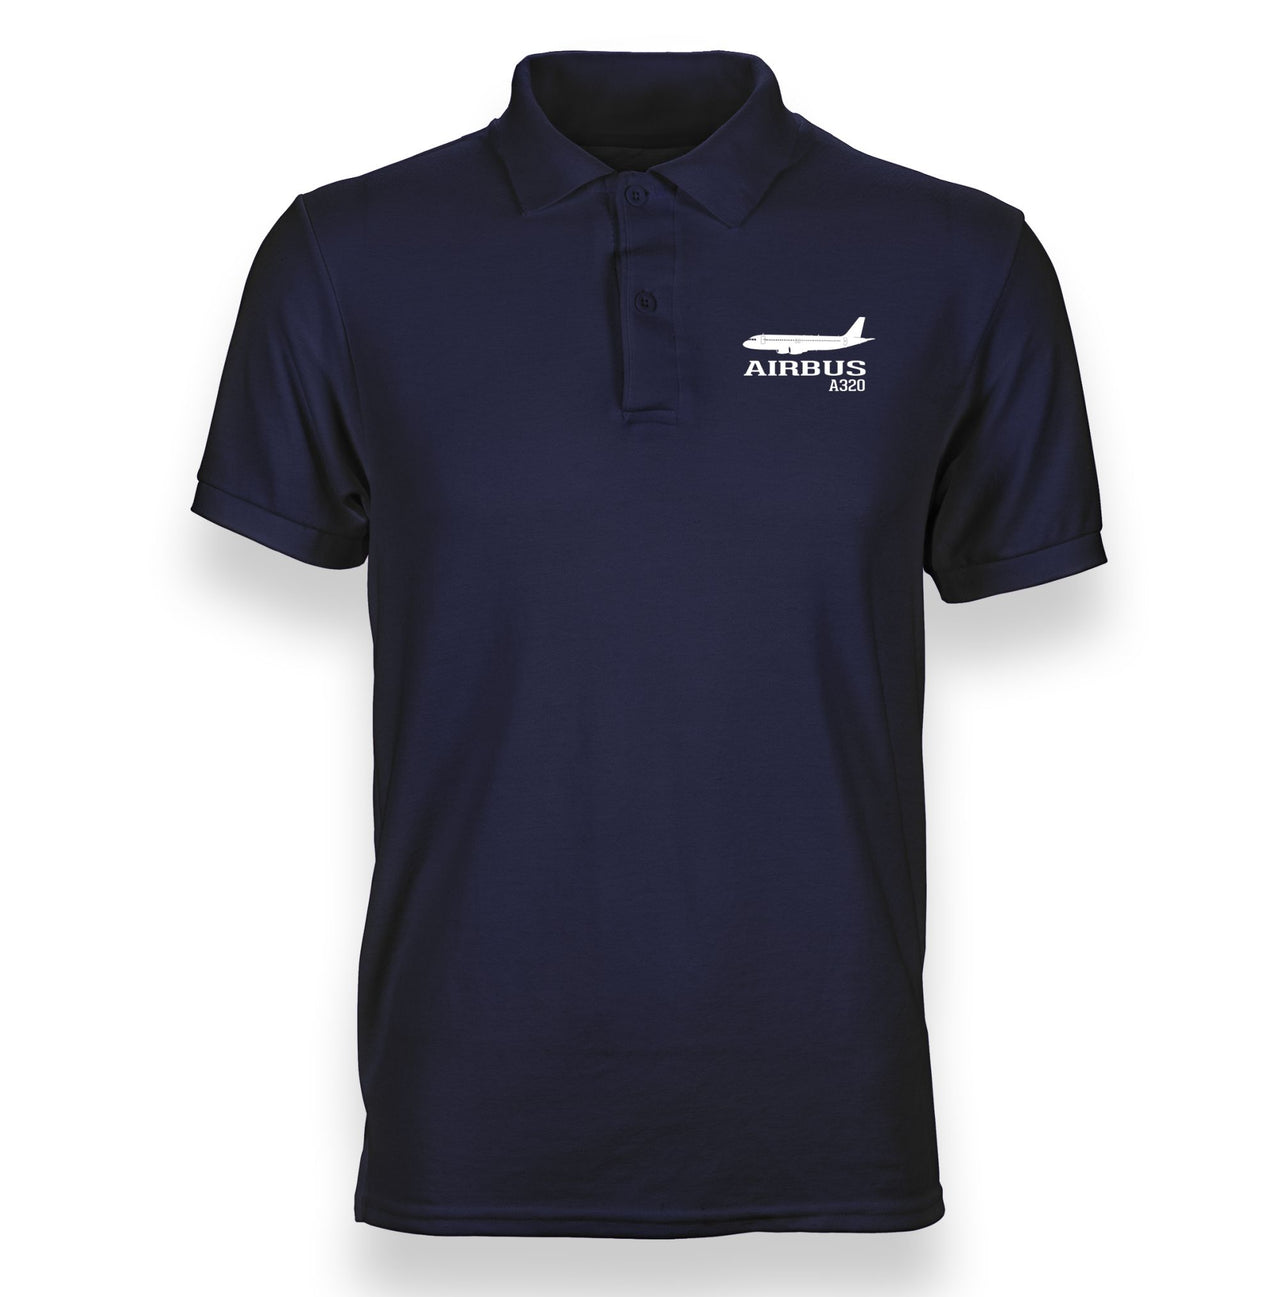 Airbus A320 Printed Designed "WOMEN" Polo T-Shirts